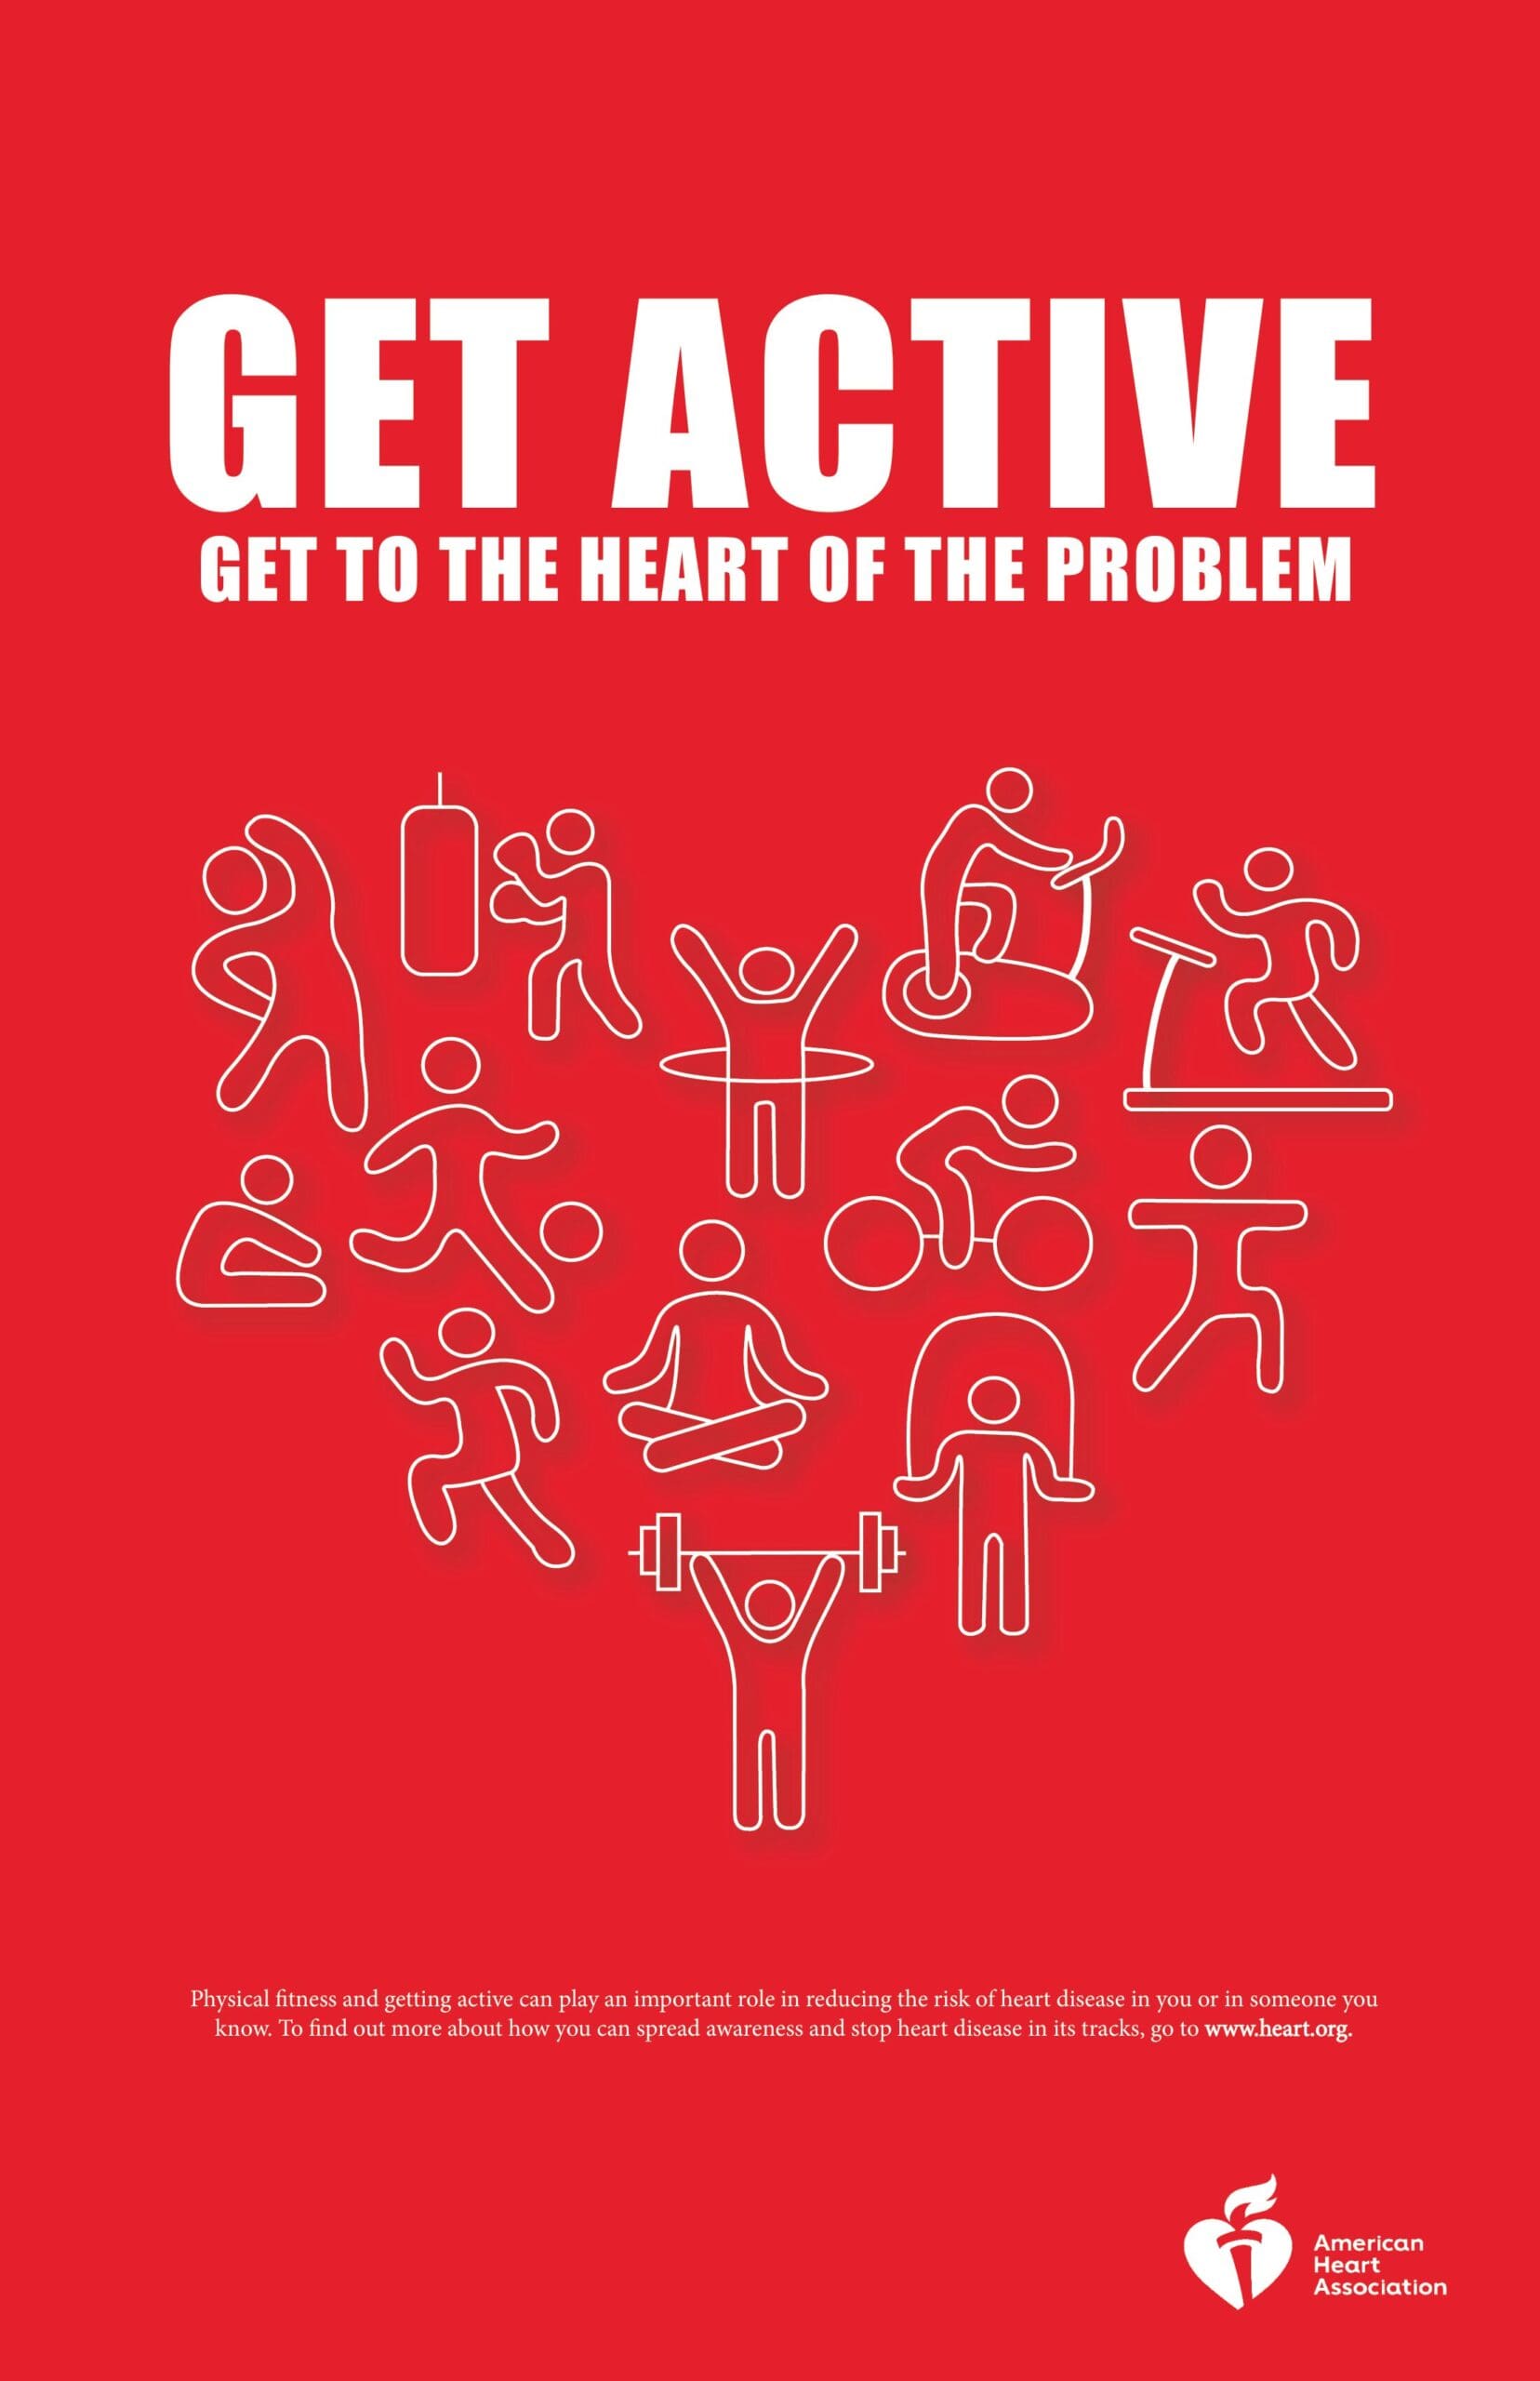 White outlines of exercises in the shape of a heart on a red background. Text says "Get Active. Get to the heart of the problem"